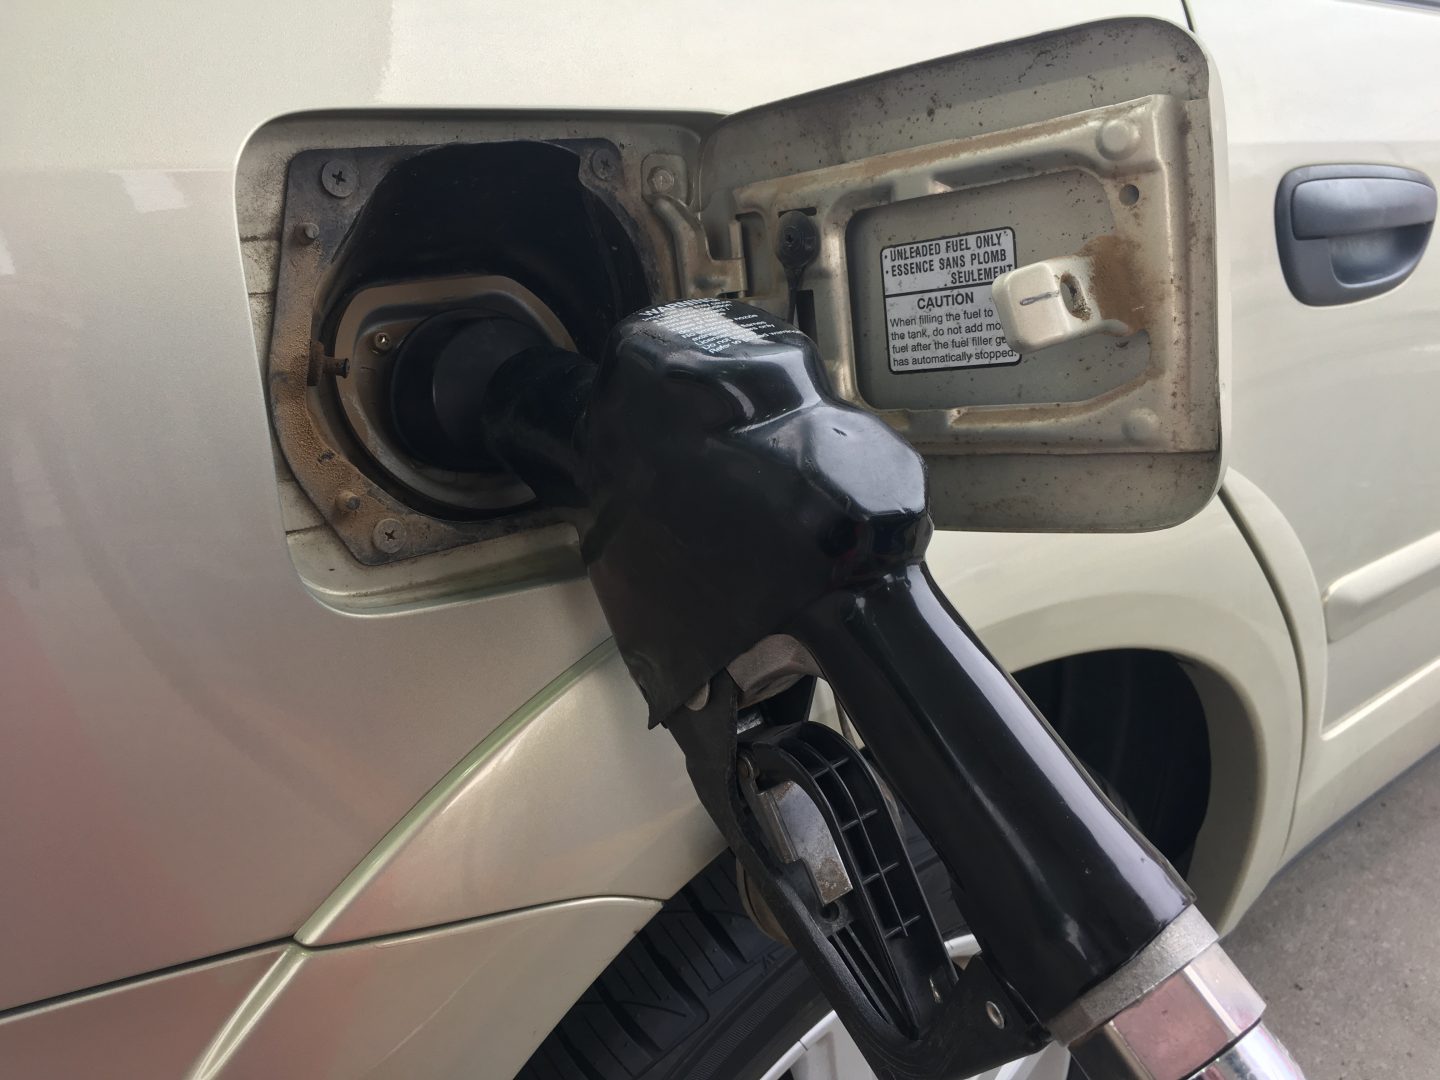 Gasoline prices are expected to climb to $3 per gallon this week in Pennsylvania.